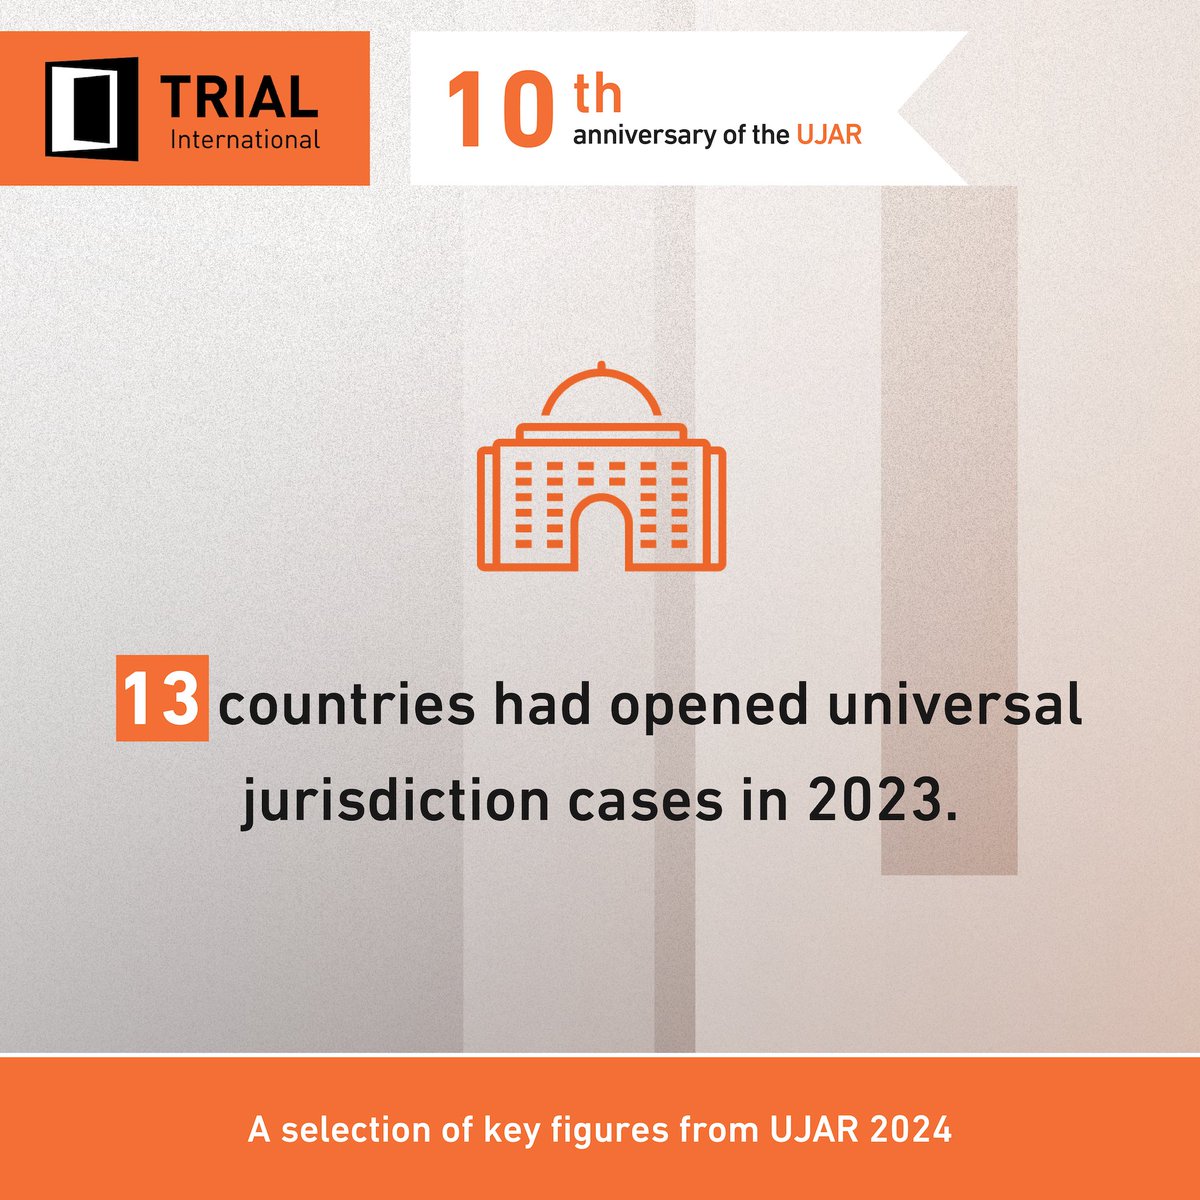 In 2023, the N° of investigations of international crimes continued to rise. But cases remained concentrated in 13 countries. As long as this is the case, the universal nature & potential impact of #UniversalJurisdiction remains unexploited. 👉#UJAR 2024: trialinternational.org/latest-post/un…